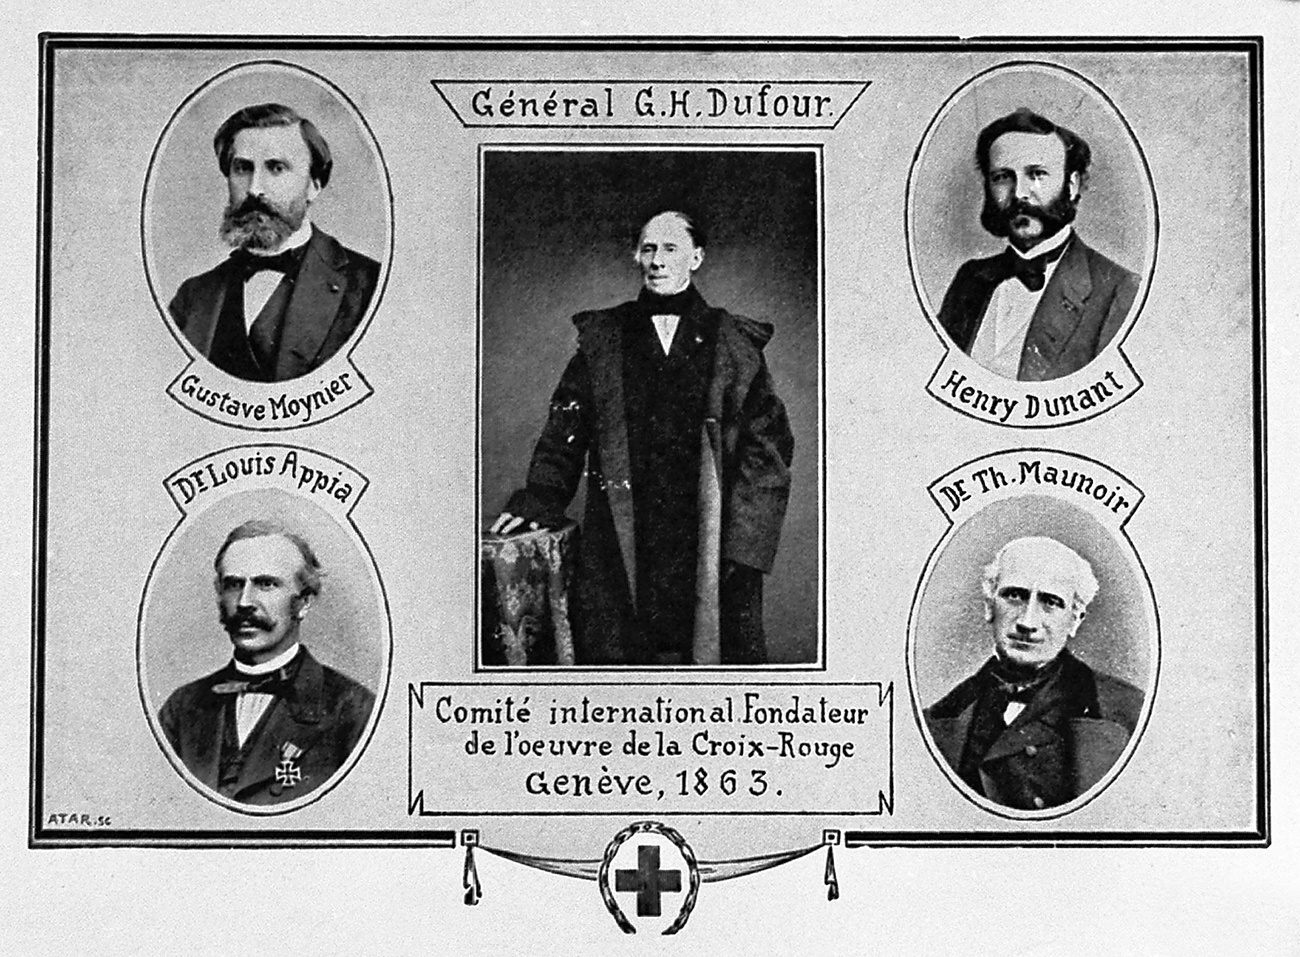 Contemporary illustration of the founders of the International Committee of the Red Cross of 1863 with Gustave Moynier (top left), Henry Dunant (top right), Louis Appia (below left) Th. Maunoir (below right) and General Guillaume Henri Dufour (middle).